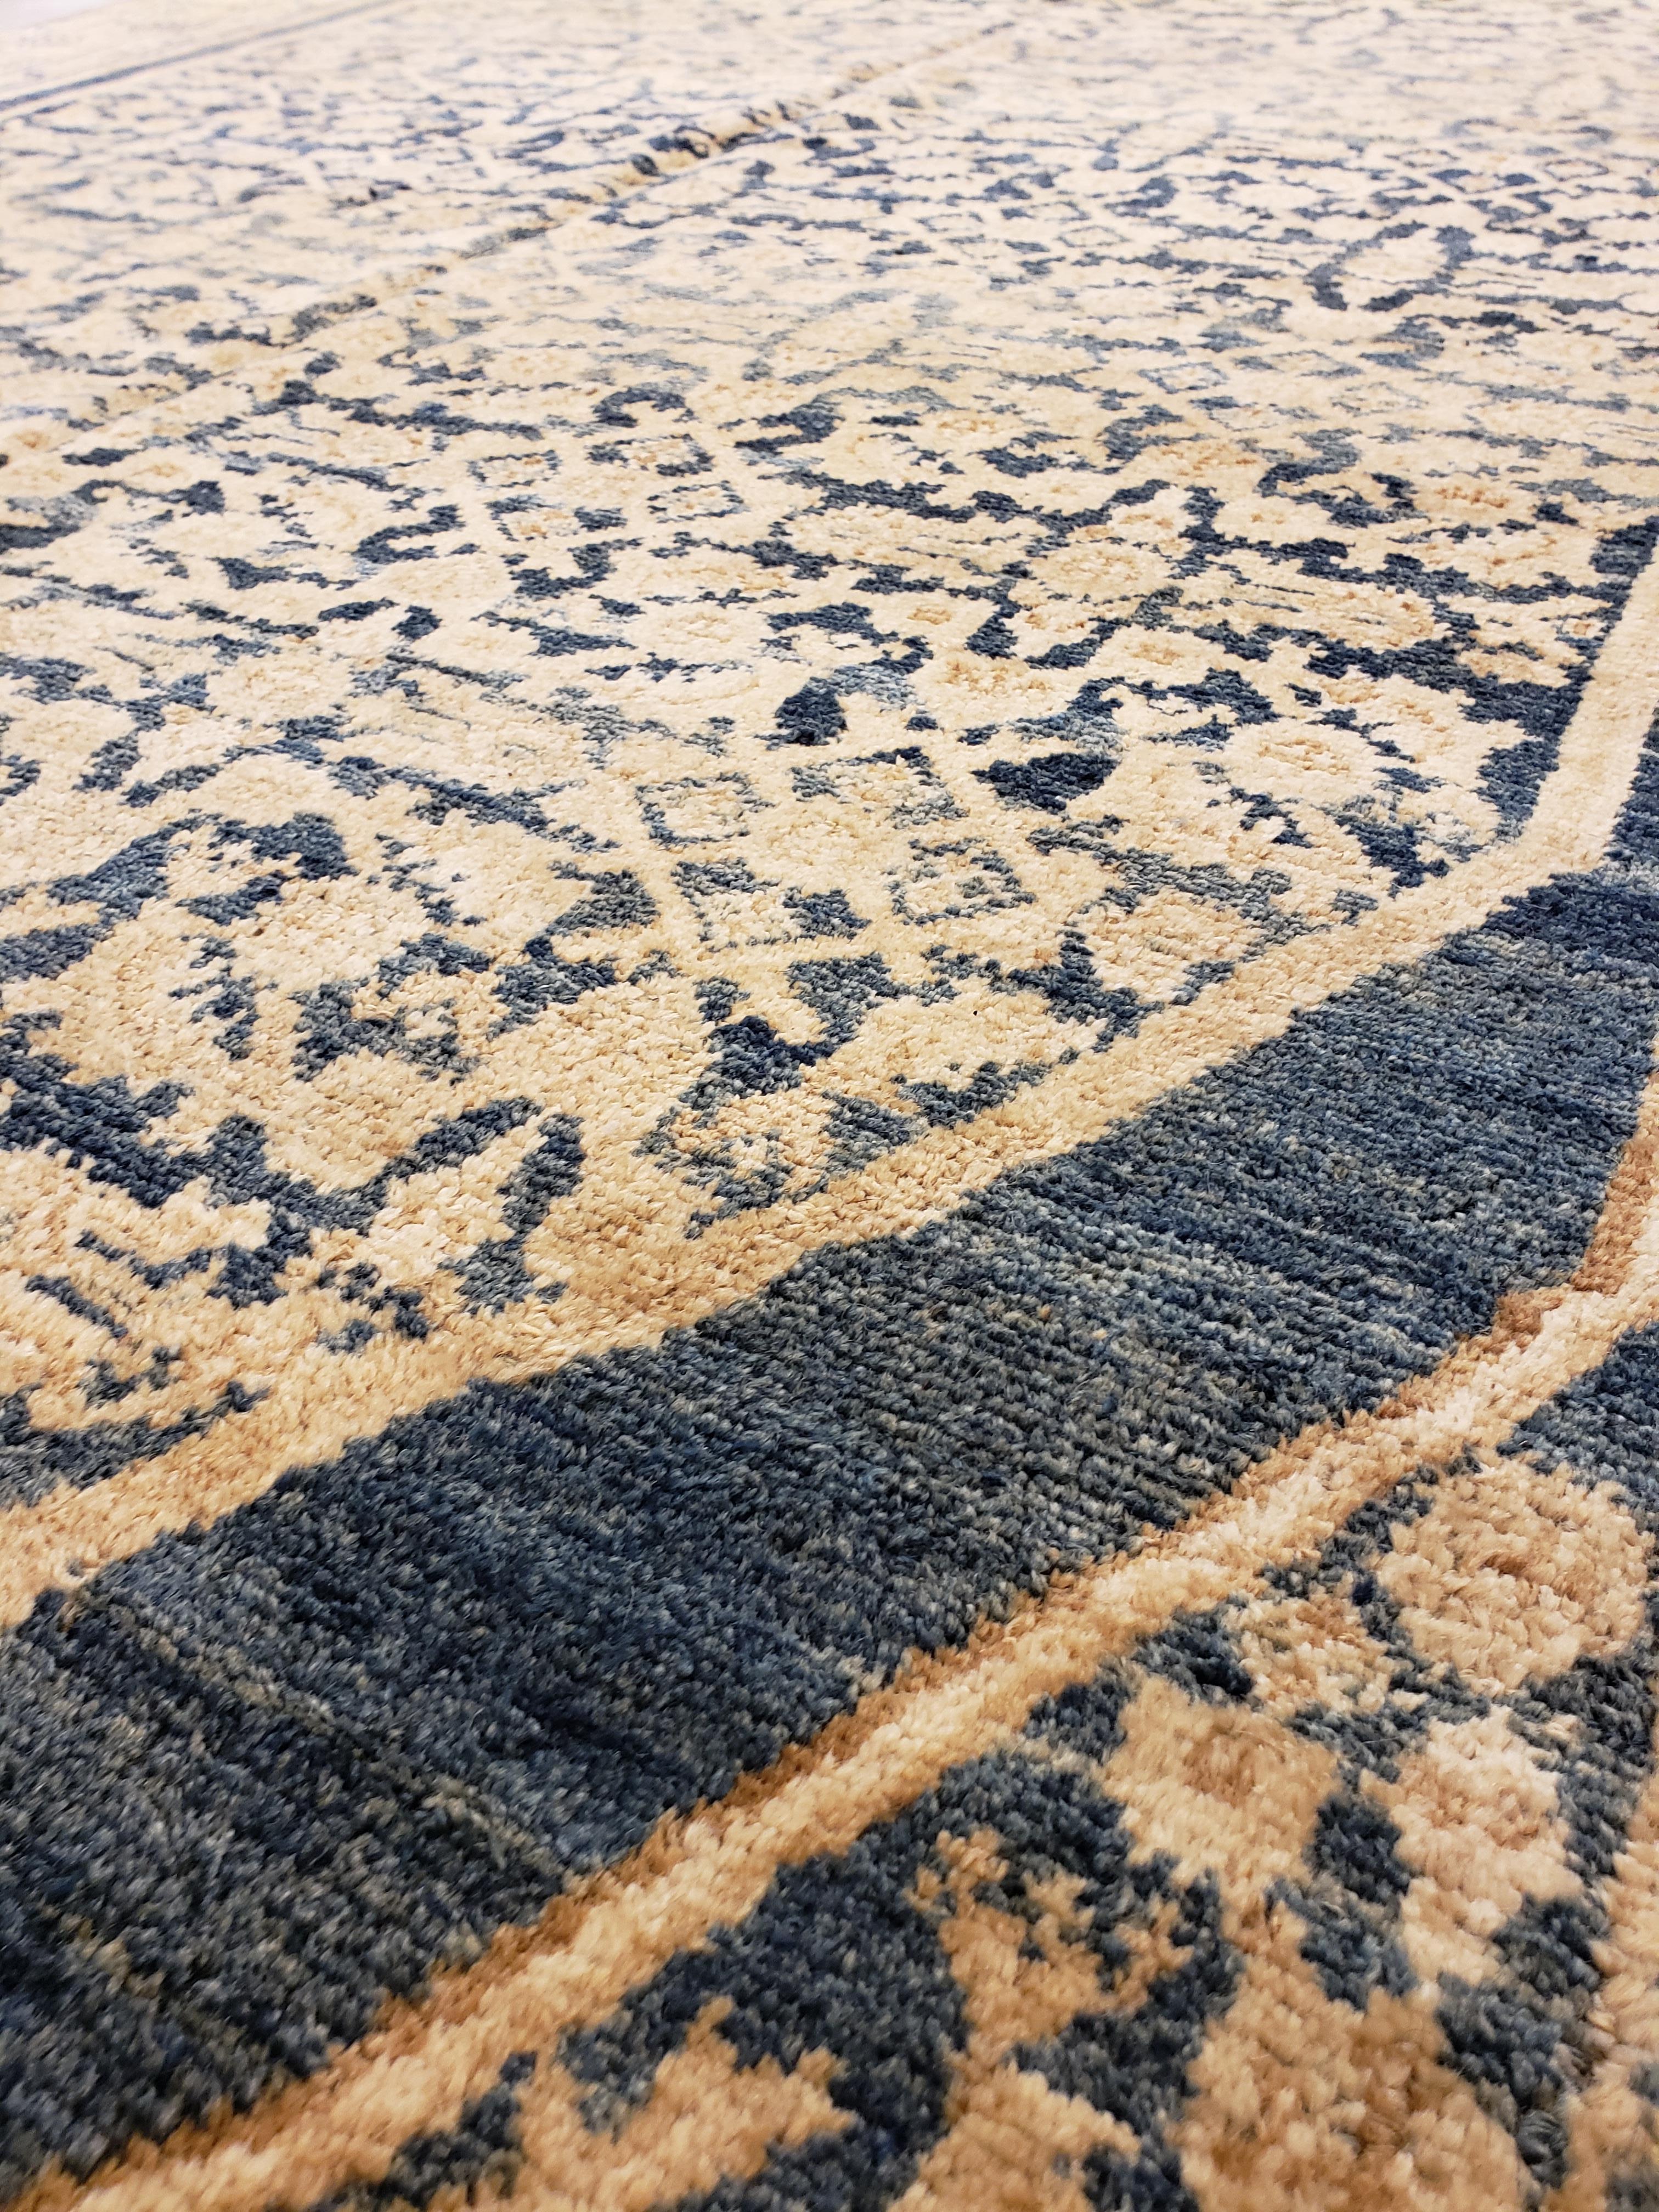 Antique Persian Malayer Runner, Handmade Oriental Rugs, Navy, Light Blue, Cream In Excellent Condition For Sale In Port Washington, NY